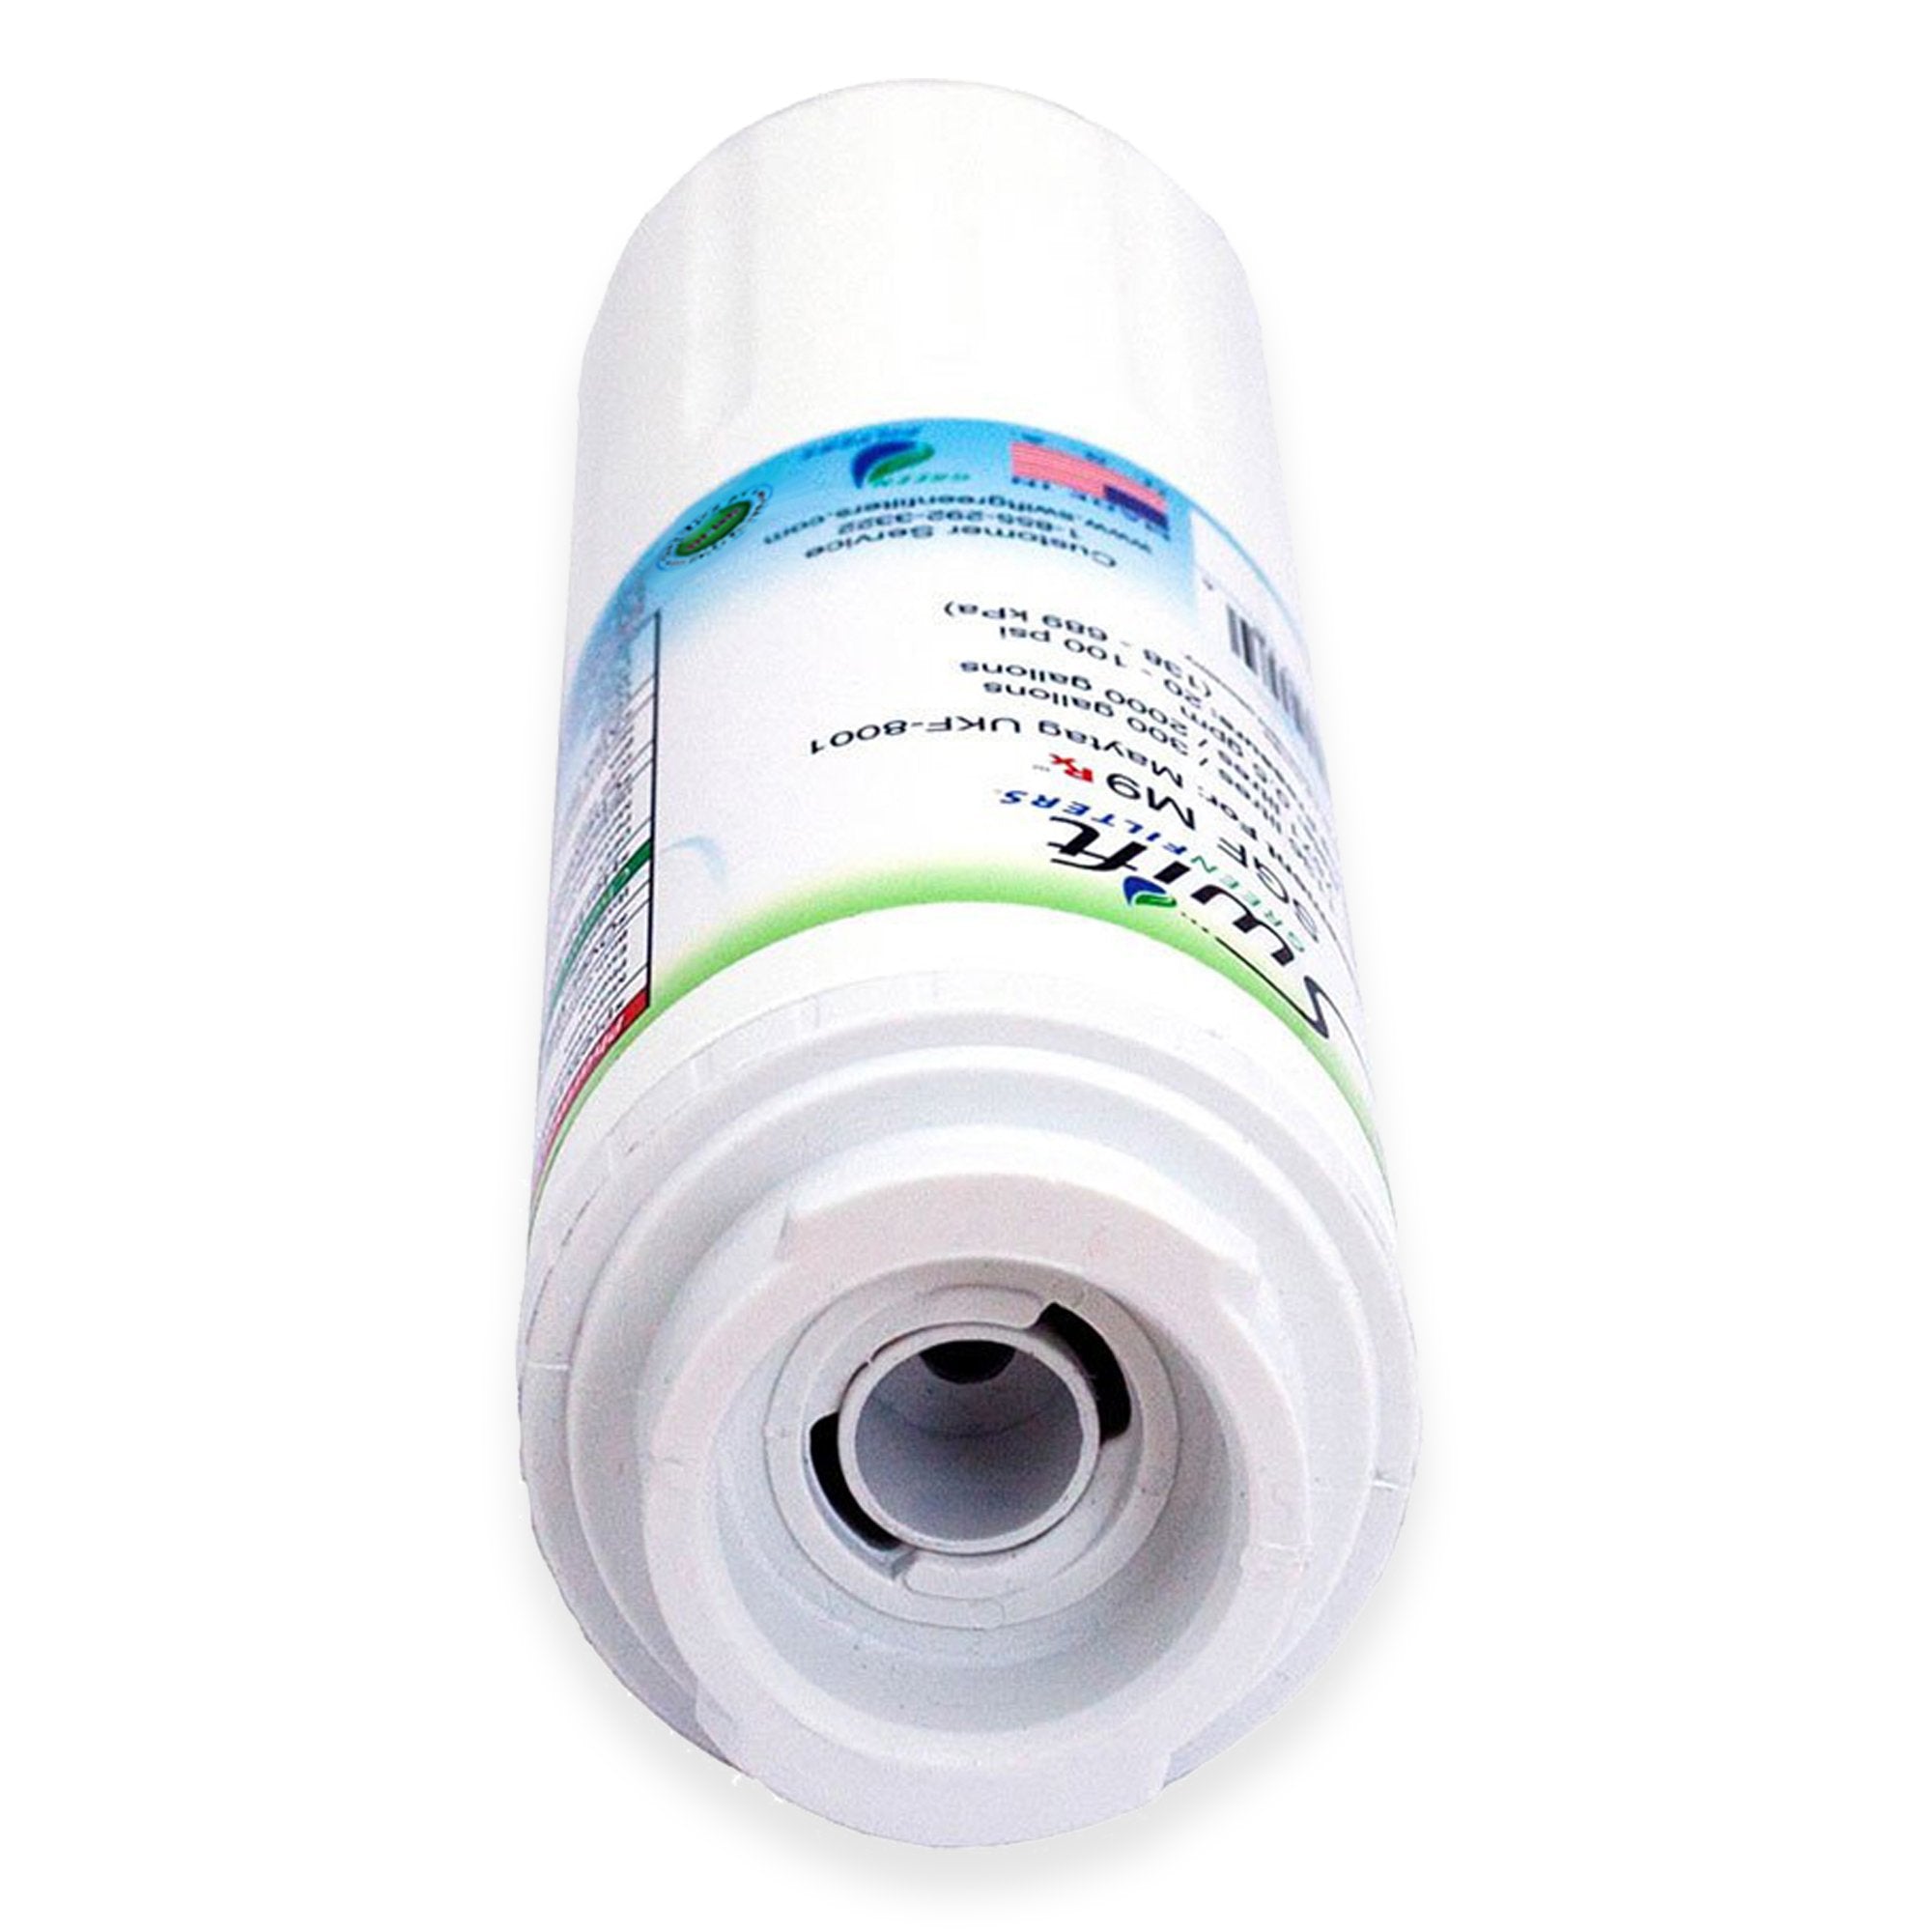 SGF-M9 Replacement water filter for Kenmore UKF8001,EDR4RXD1,FILTER 4,,46-9006,CLCH101, by Swift Green Filters